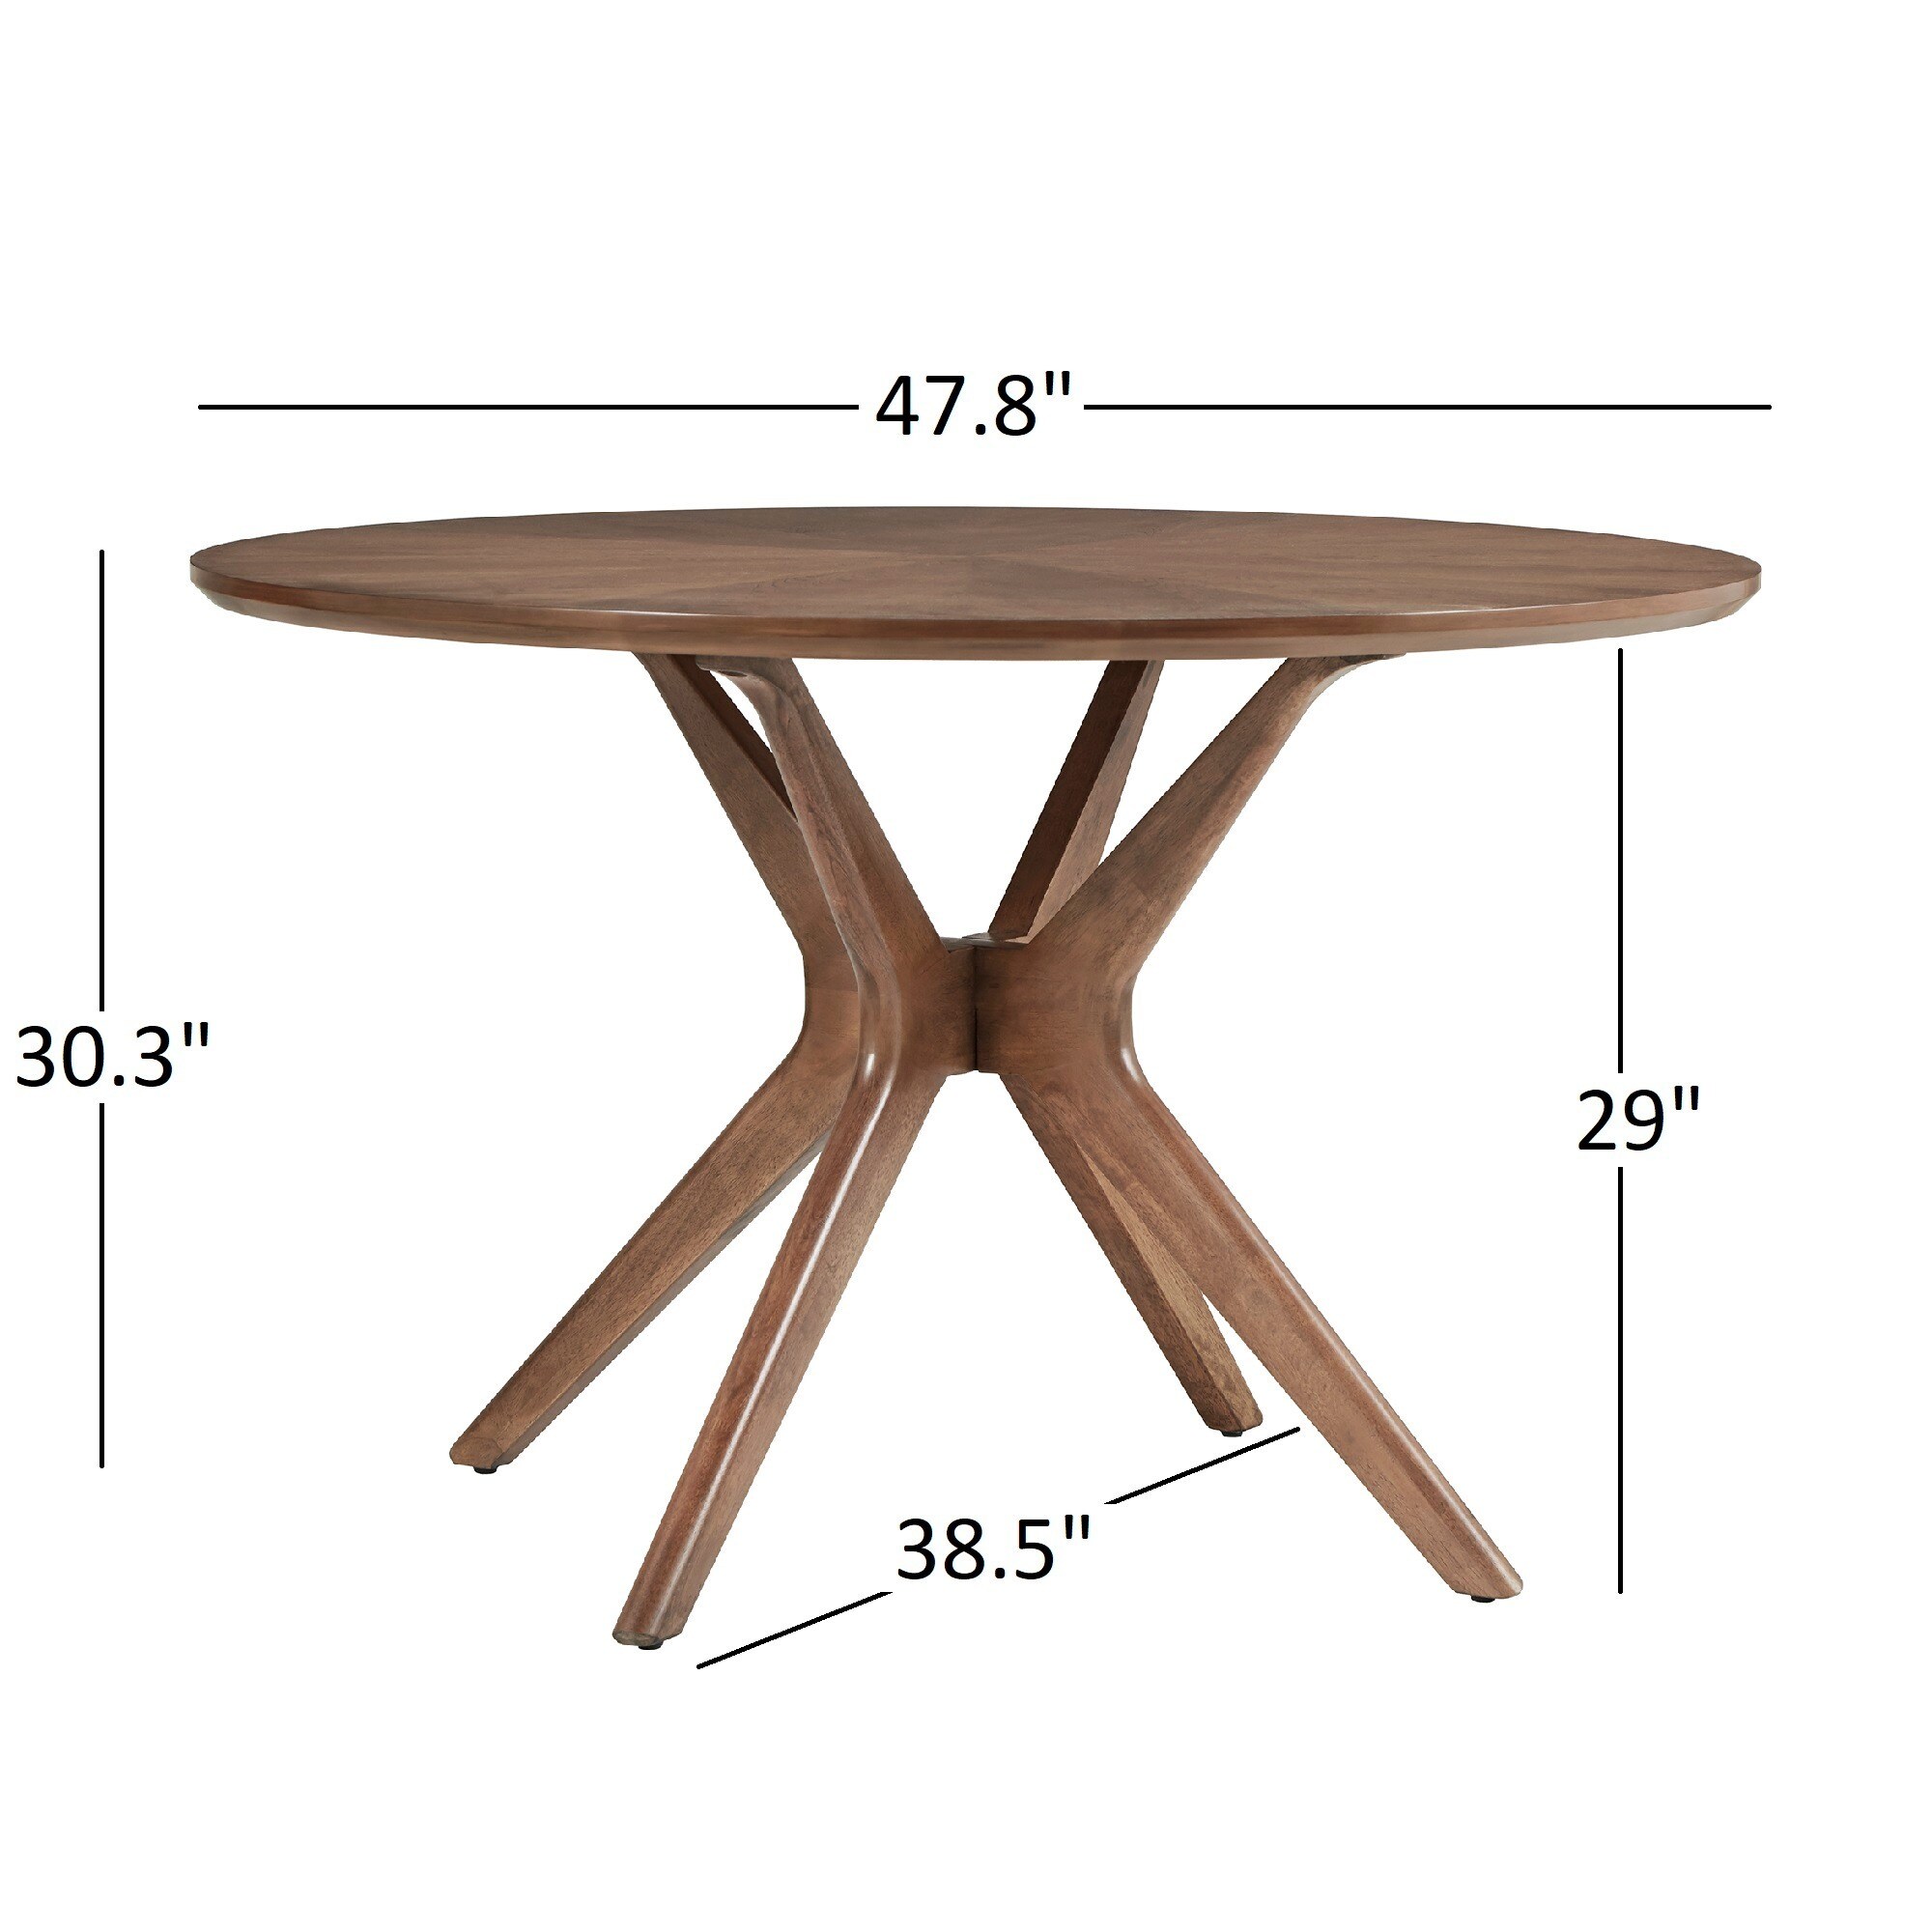 https://ak1.ostkcdn.com/images/products/18218121/Nadine-Walnut-Finish-Round-Dining-Set-Curved-Back-Chairs-by-iNSPIRE-Q-Modern-361cfd34-e02a-4092-91da-d4c0d22290f2.jpg